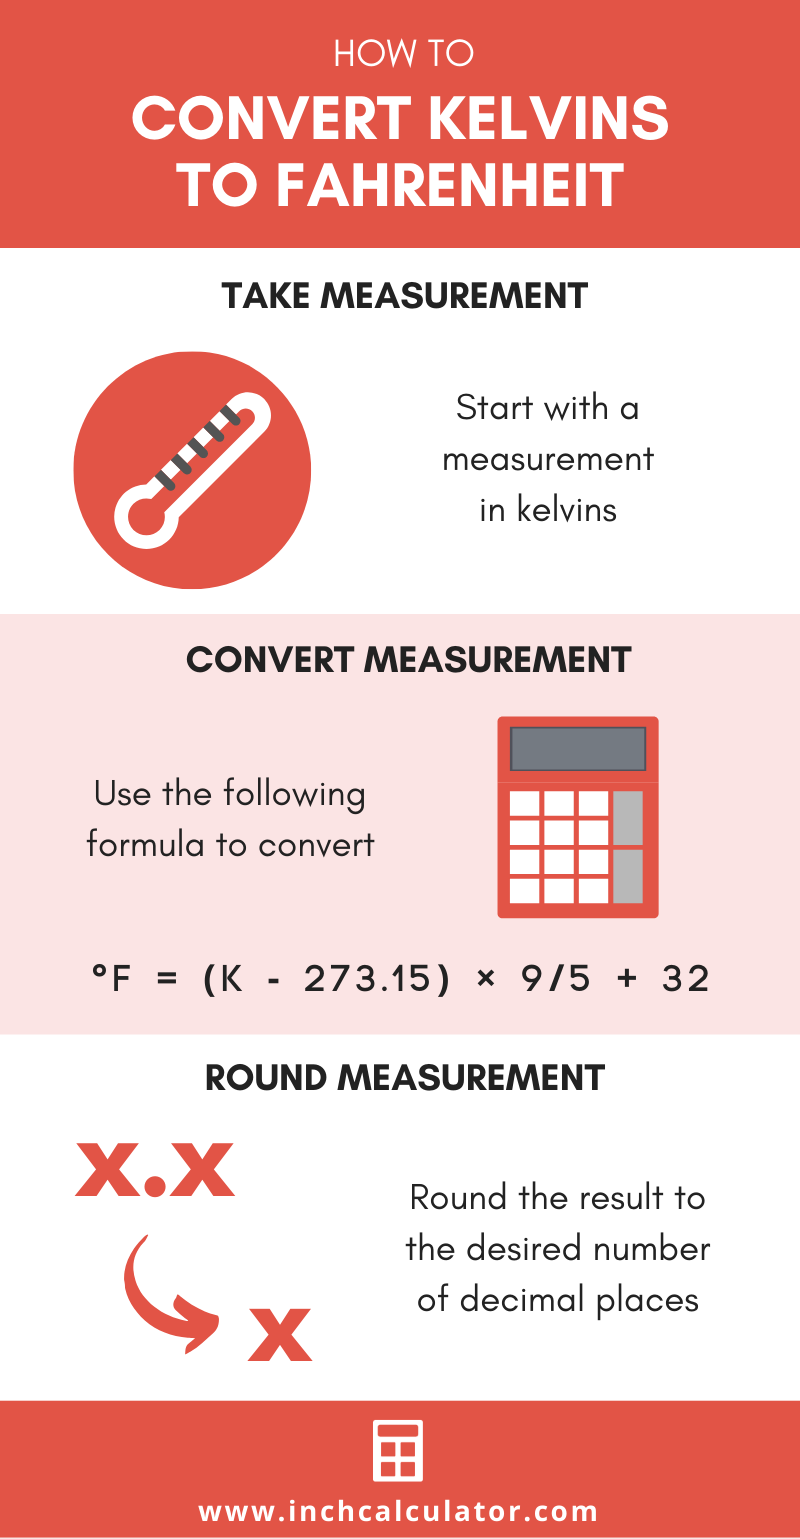 infographic showing how to convert kelvins to degrees fahrenheit